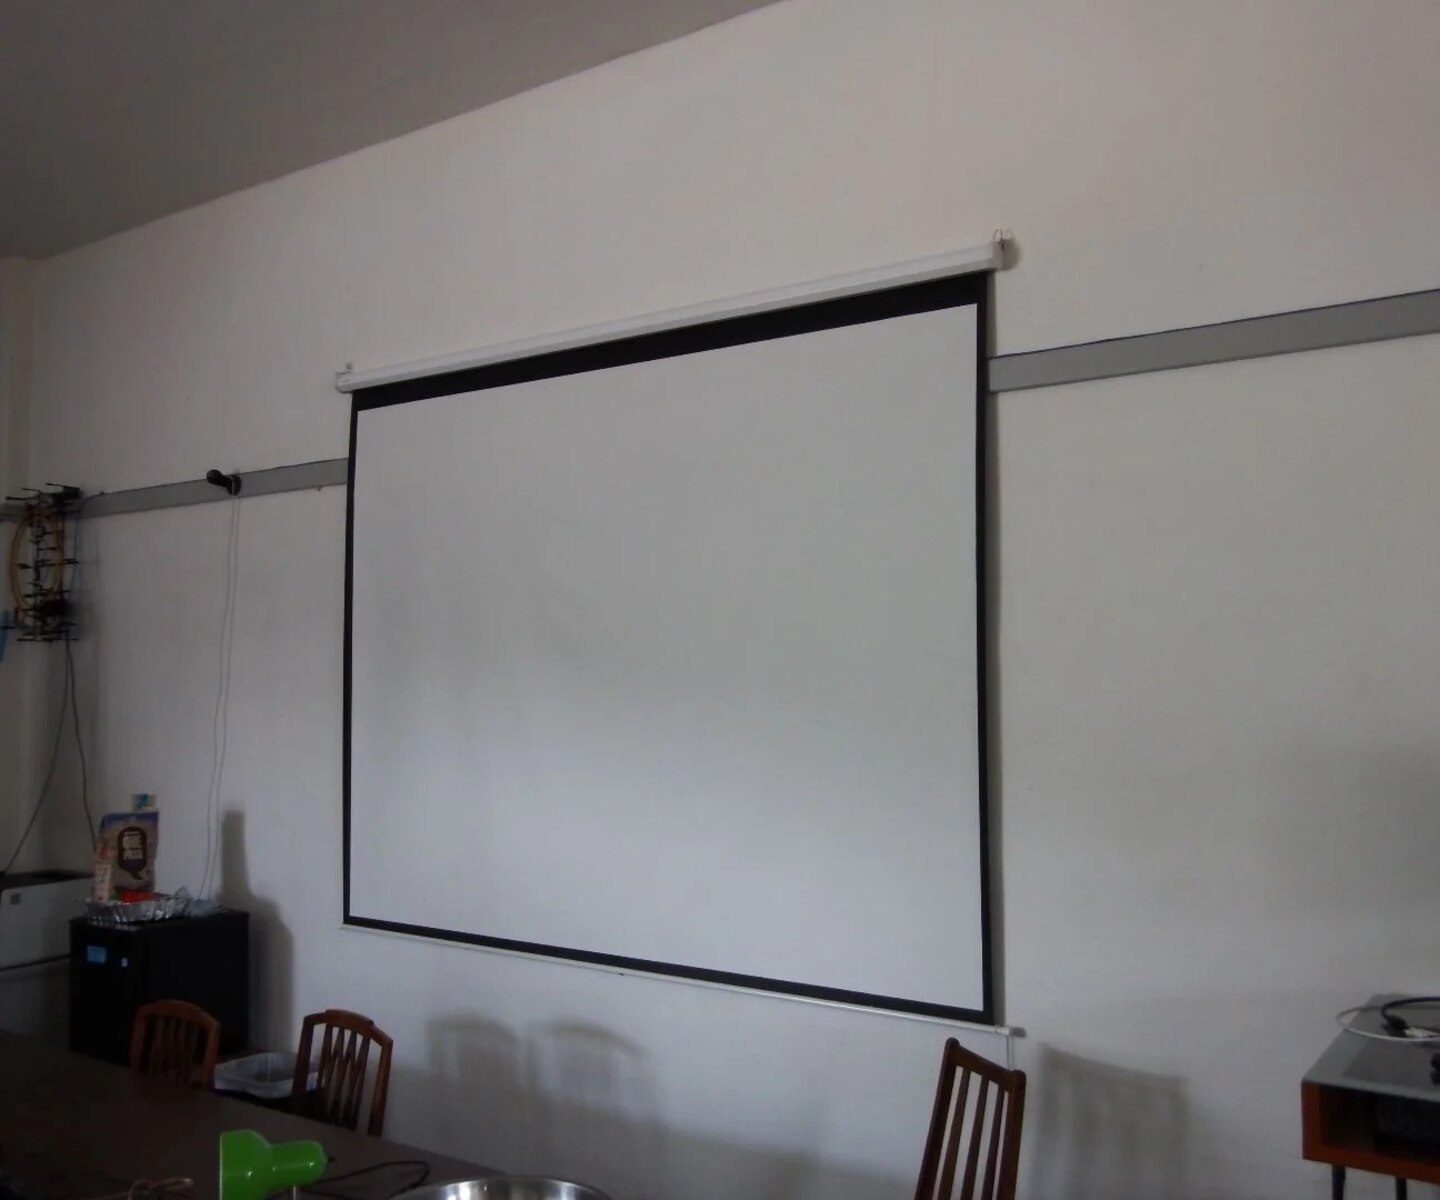 How To Install Projector Screen On Wall